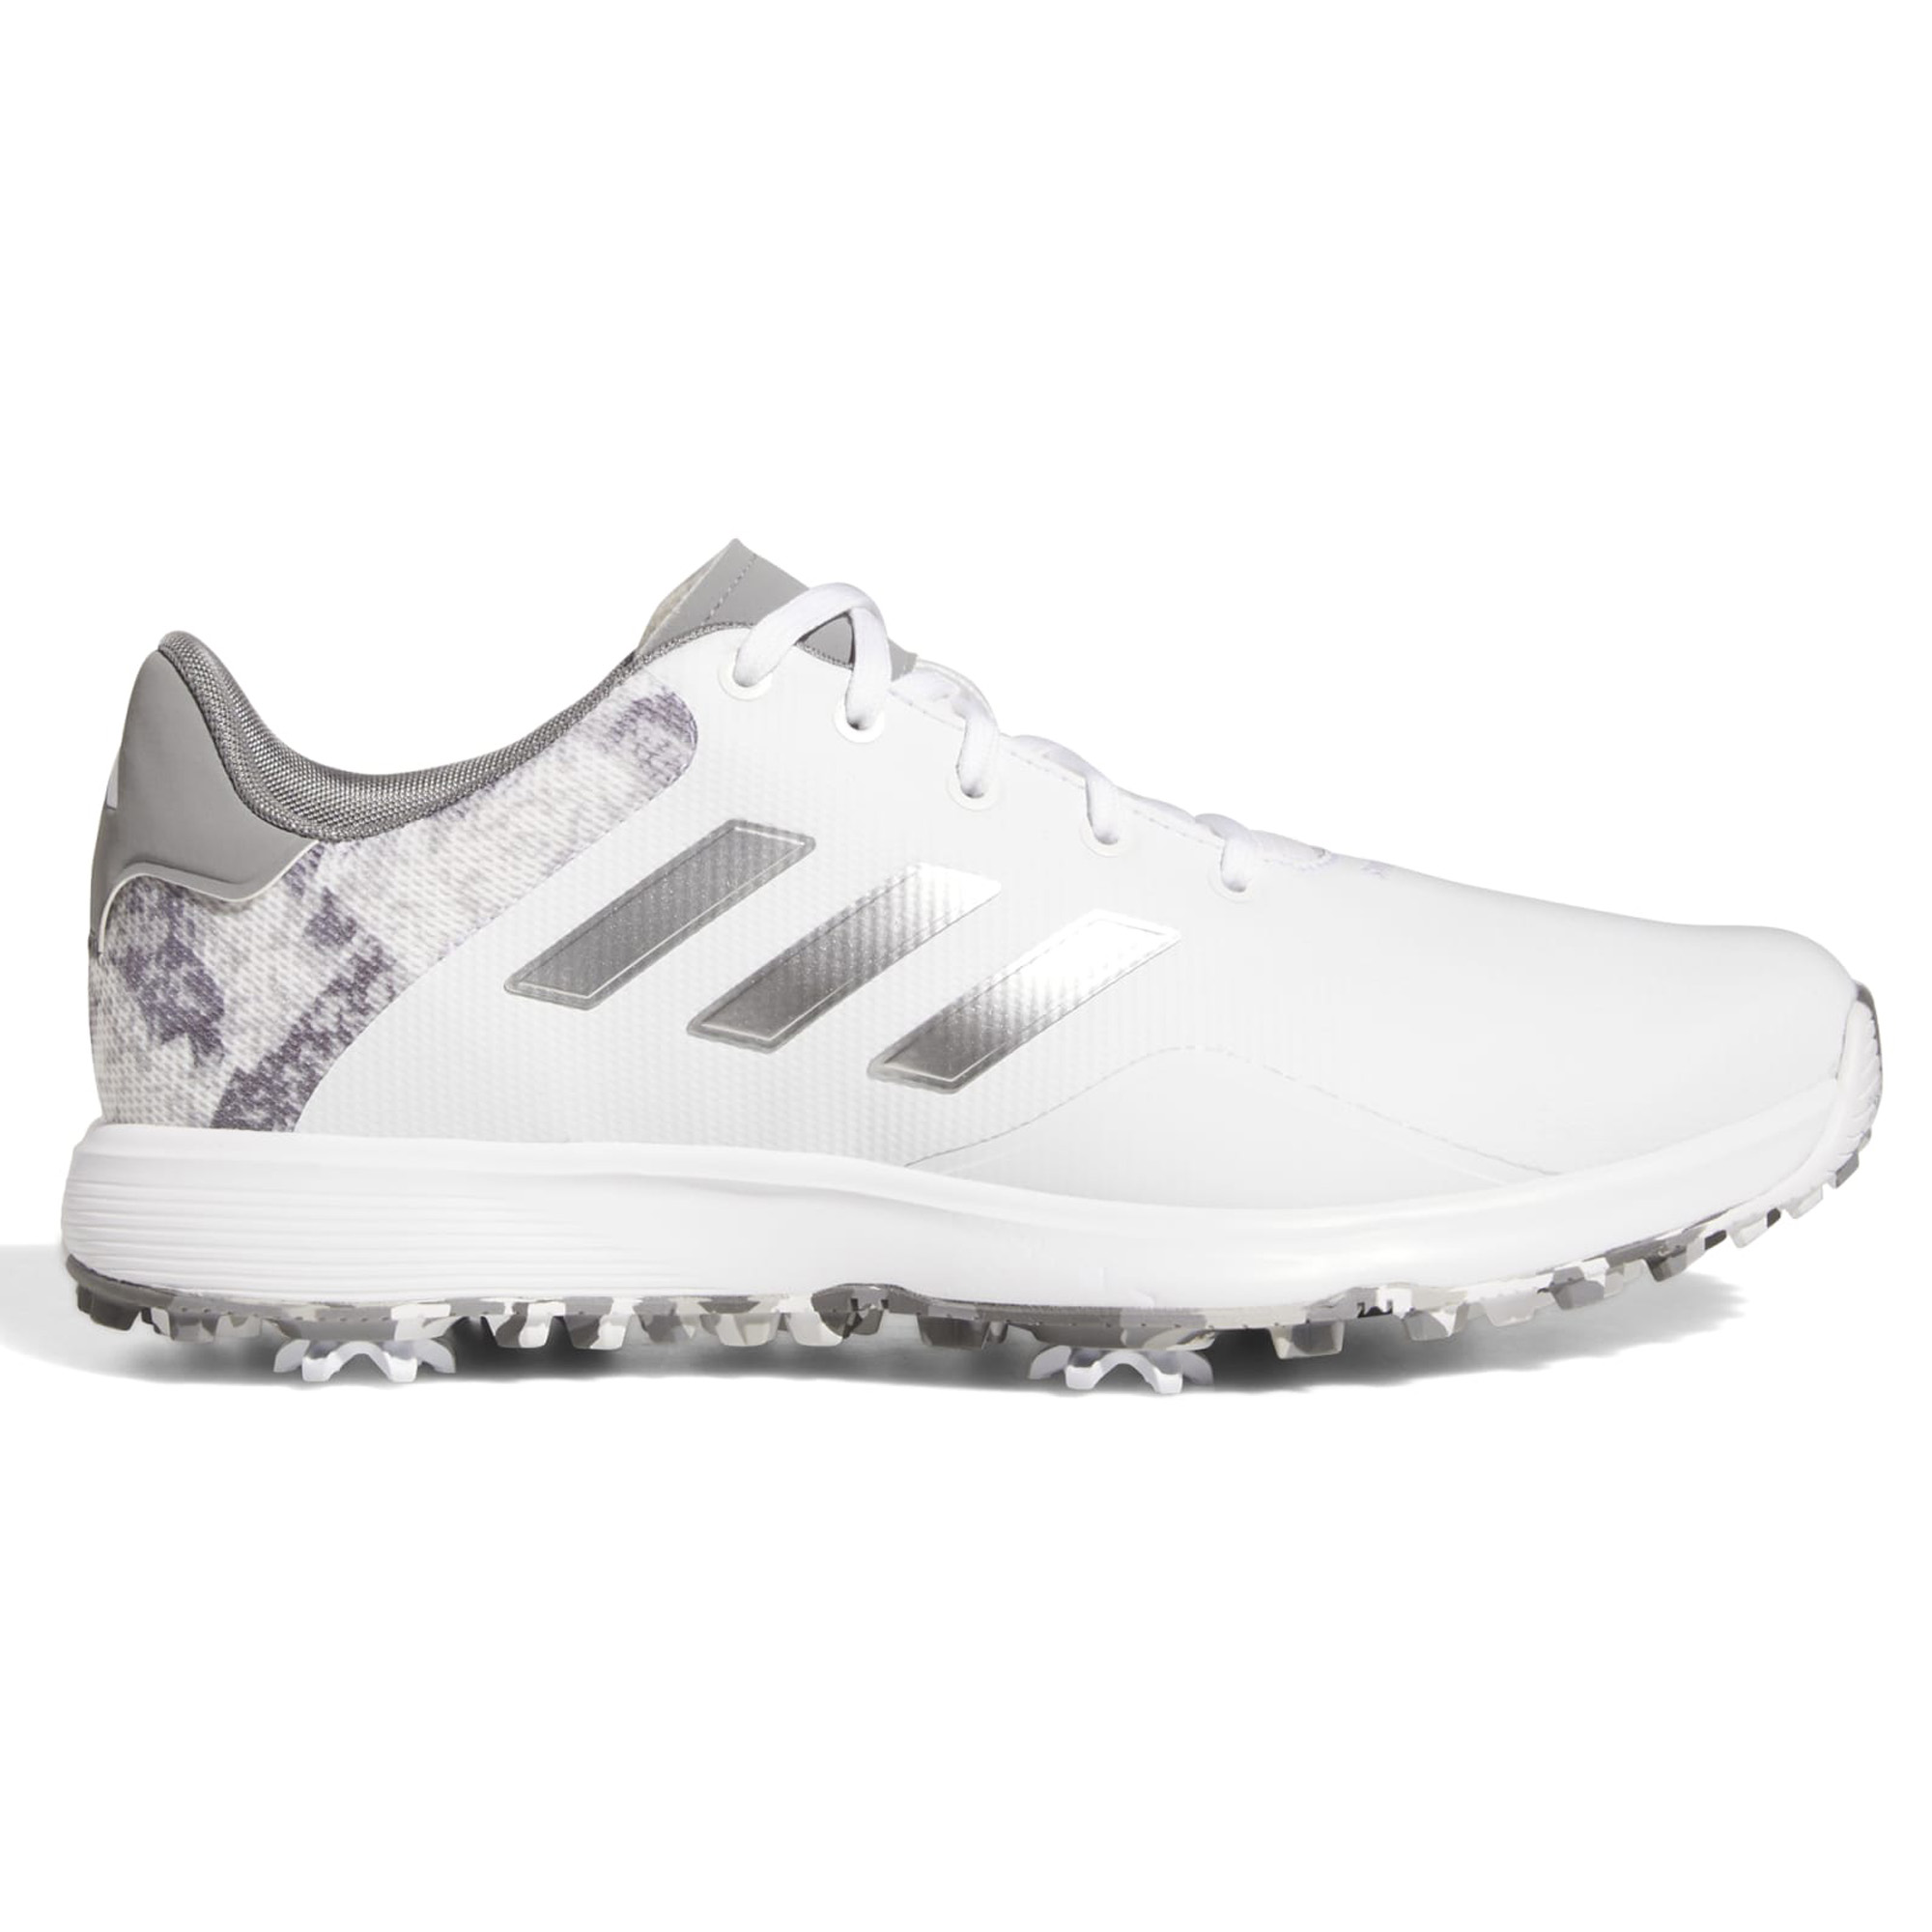 adidas Mens S2G Spiked Golf Shoes  - White/Silver/Grey Three